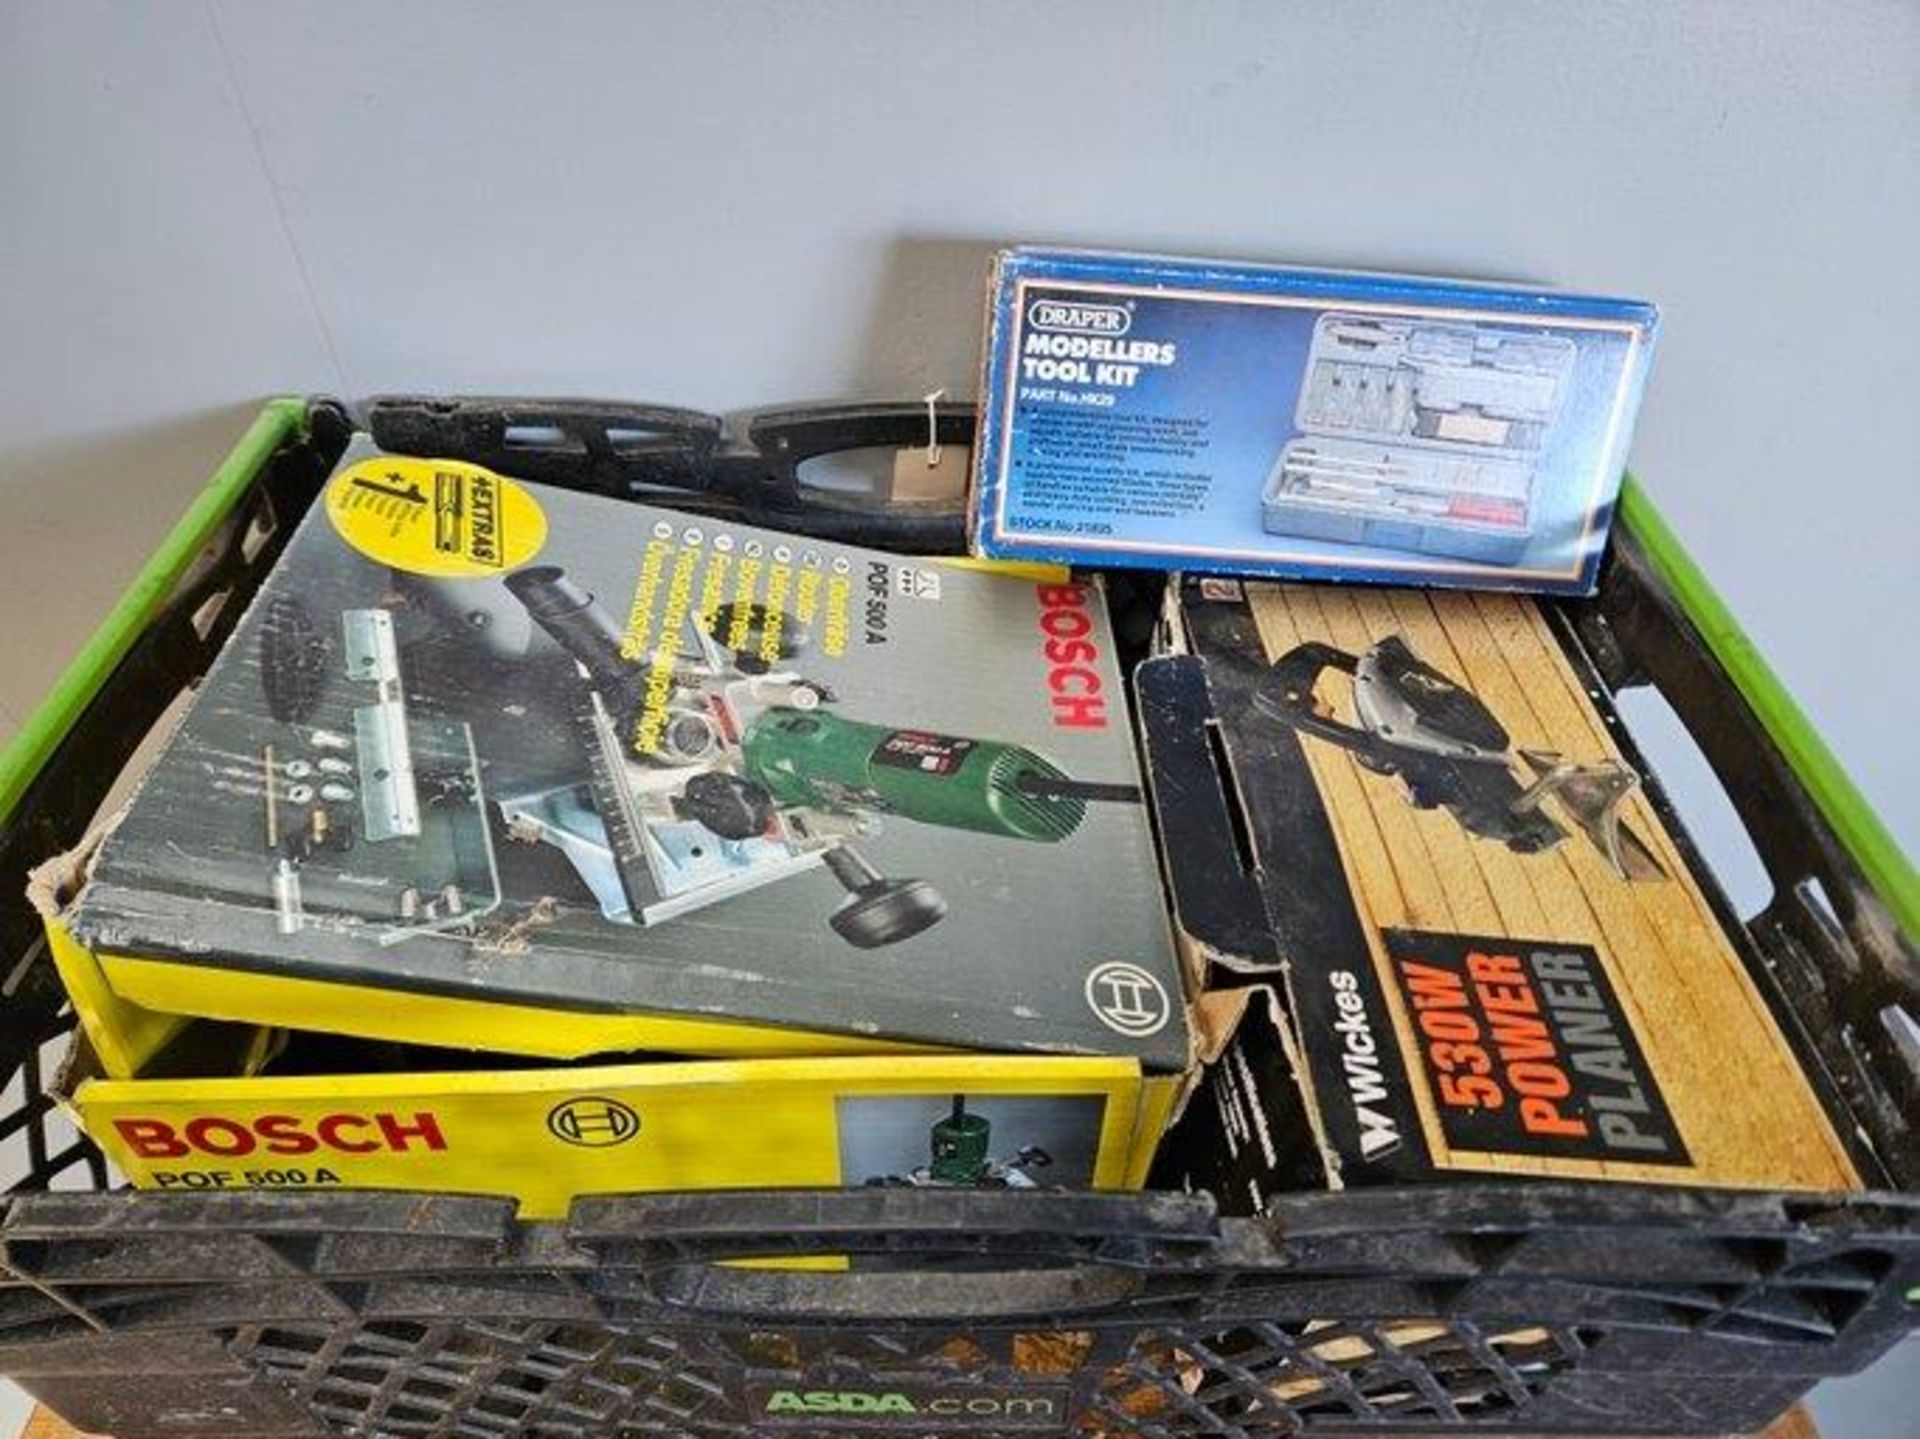 Box Including Bosch Router, Wickes Power Planer Etc